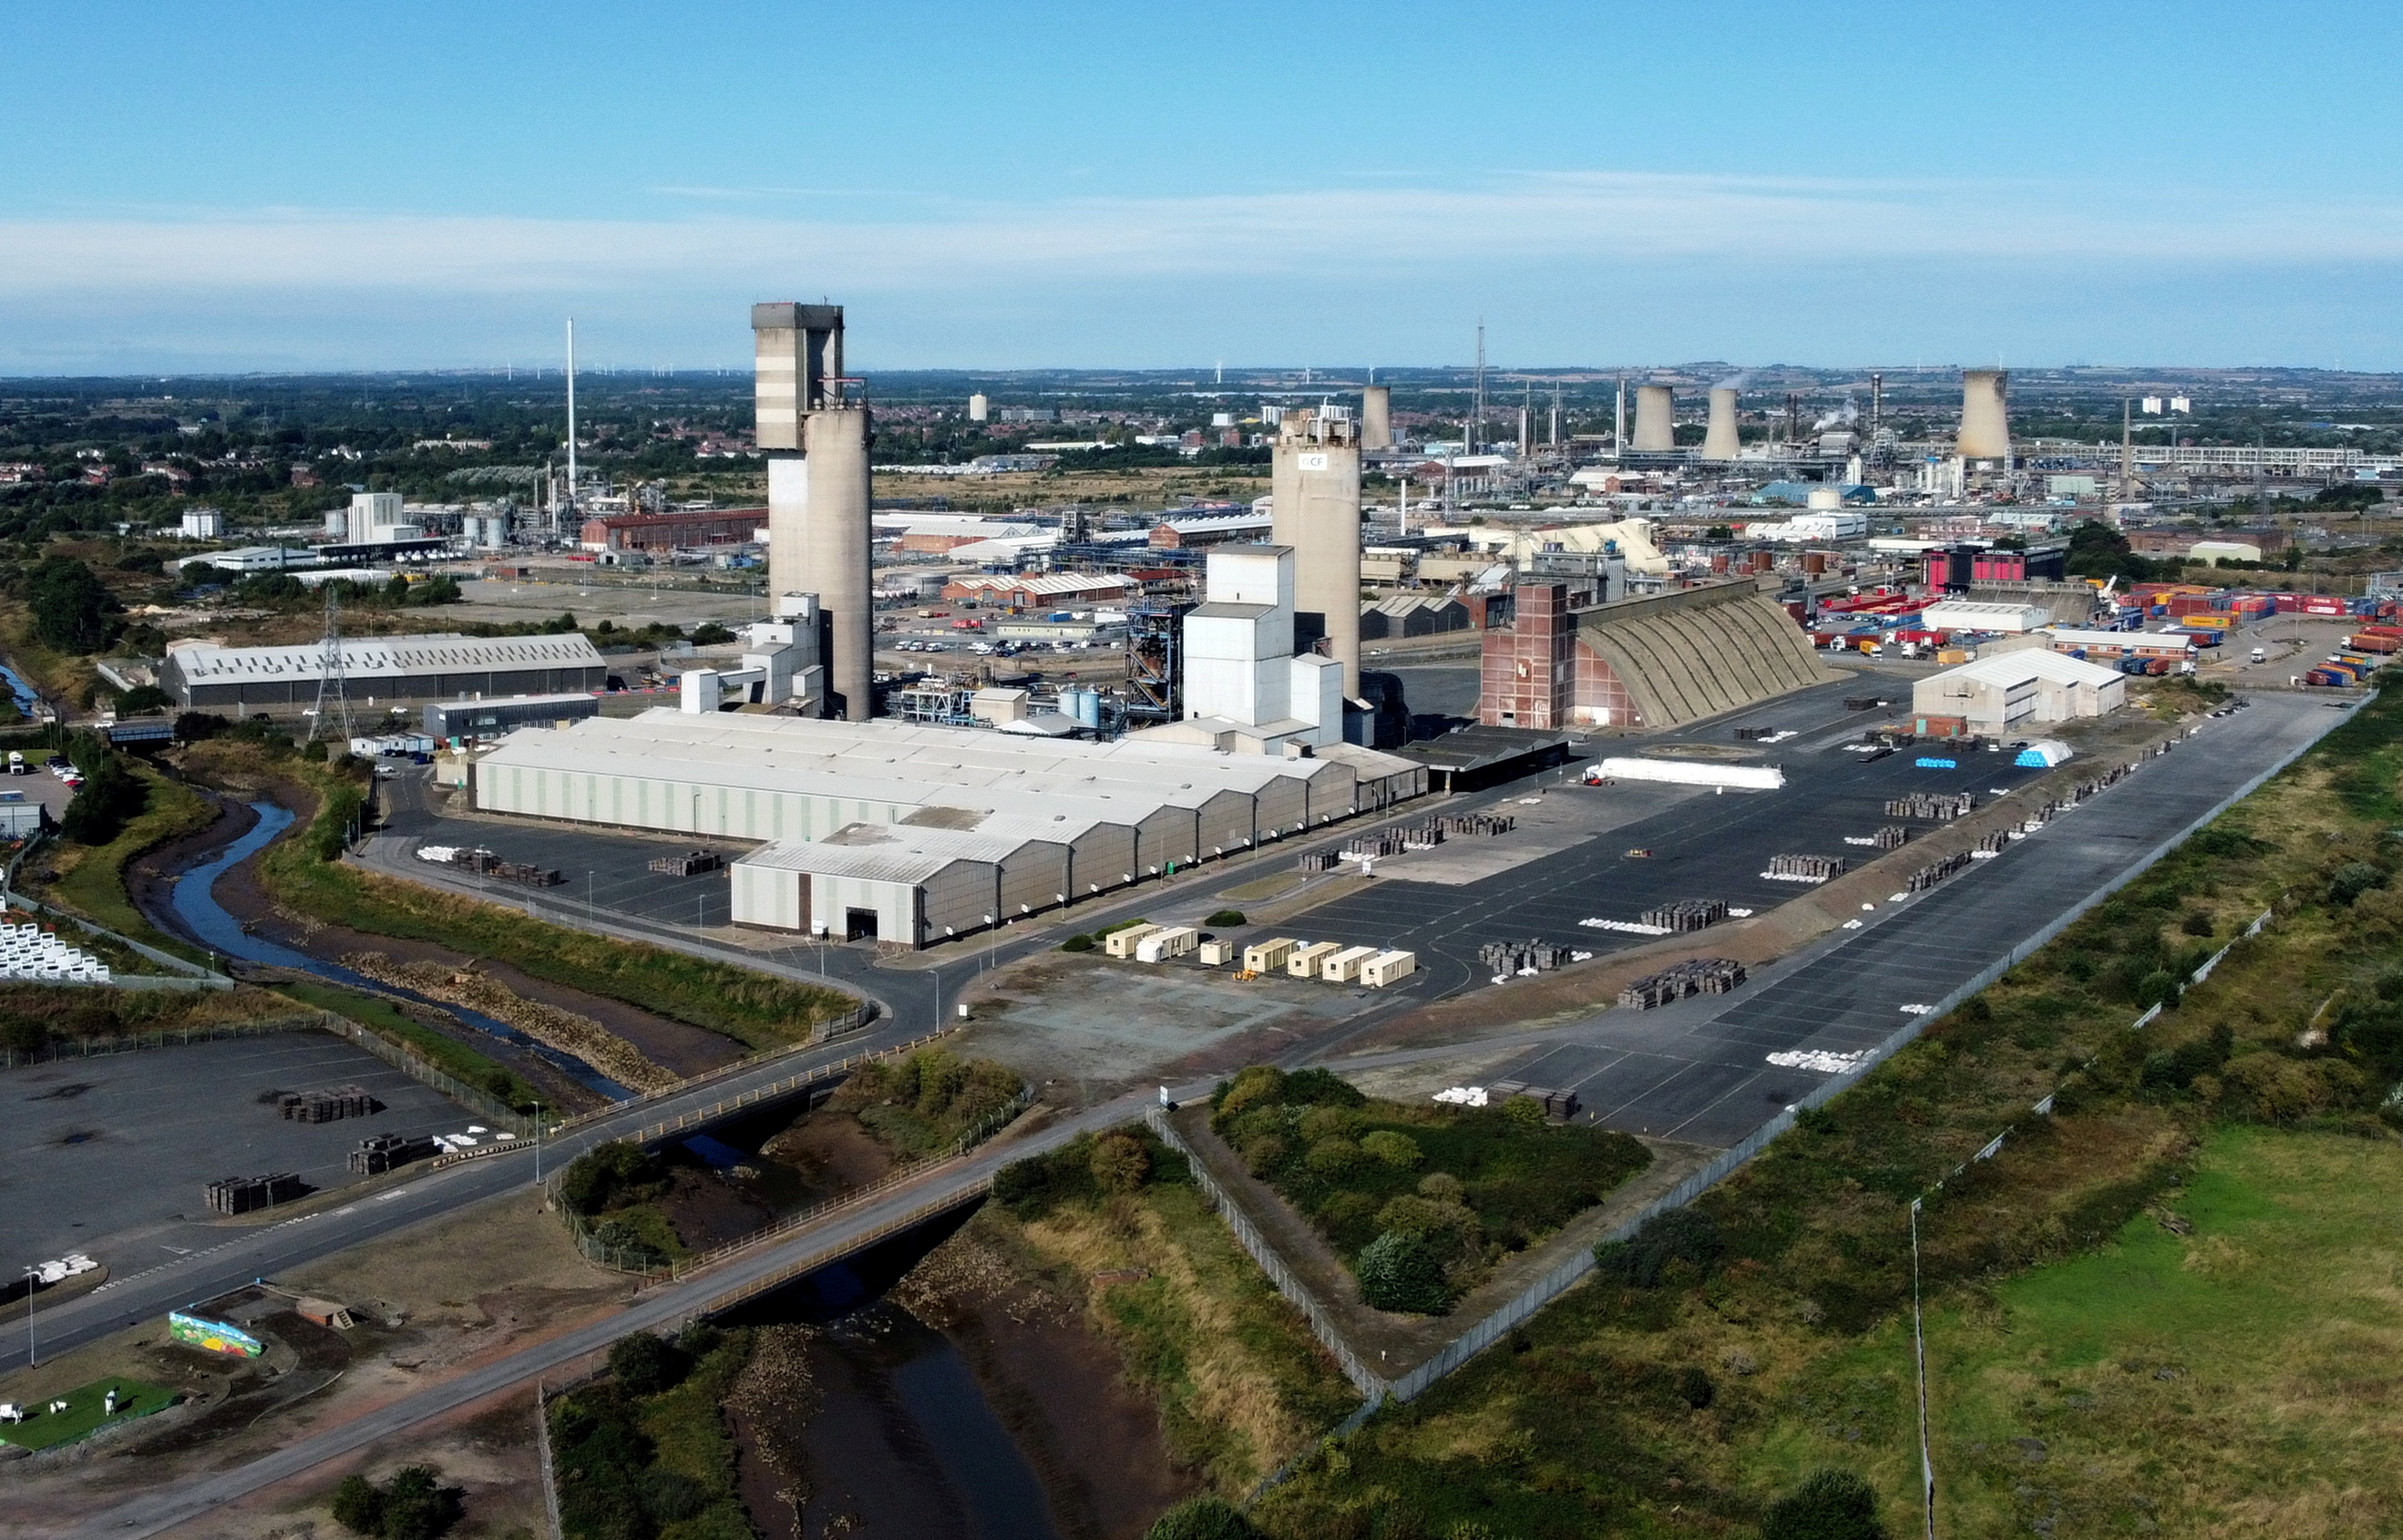 A general view of the CF industries plant in Billingham